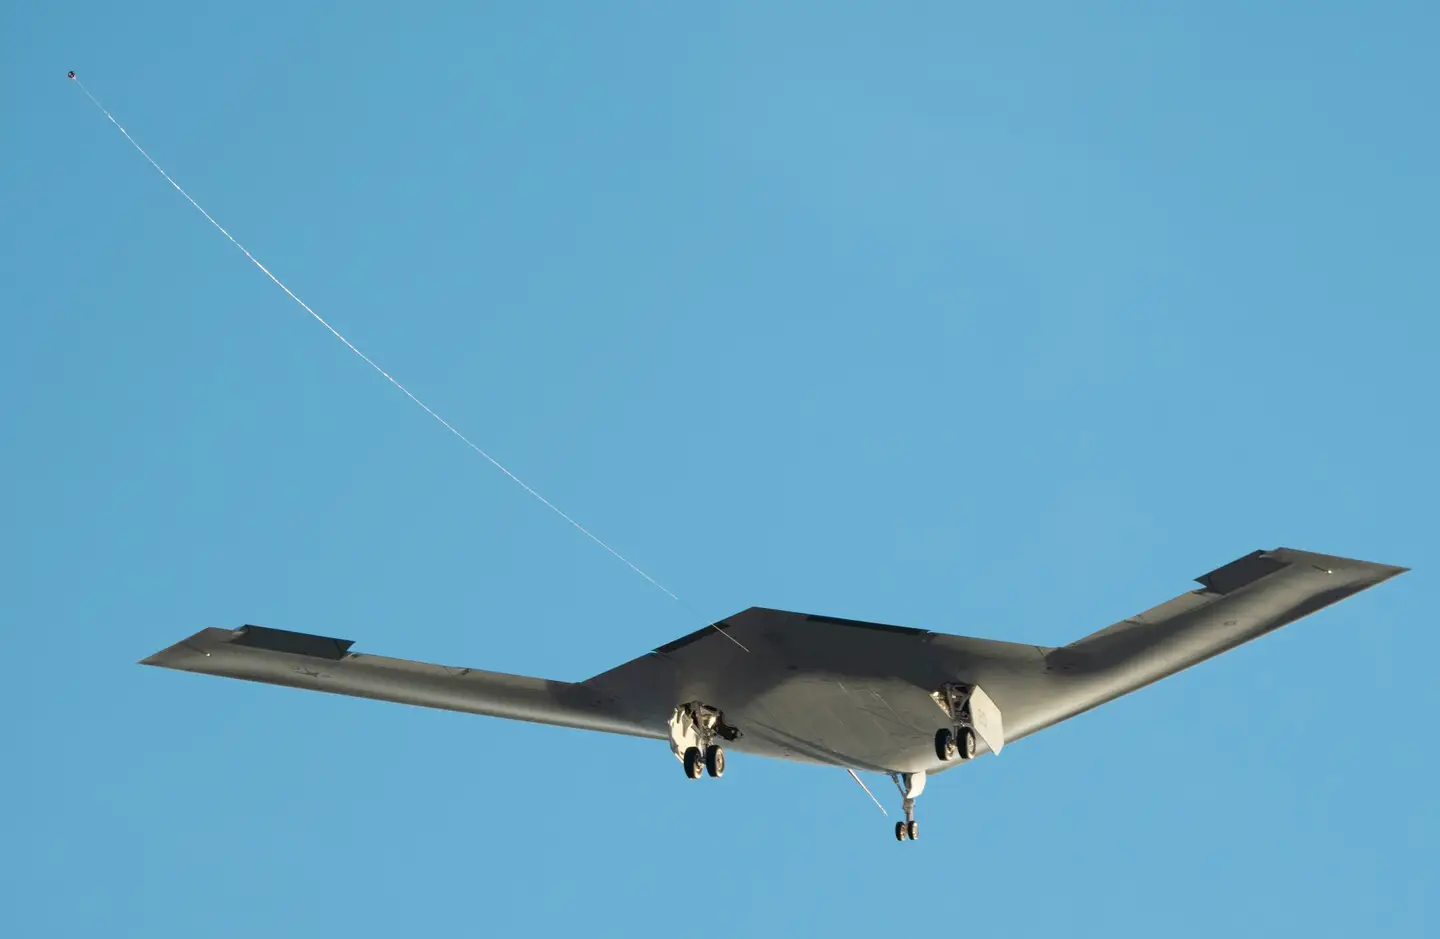 B-21 with air data cable and cone on its first flight. Photo via The War Zone.